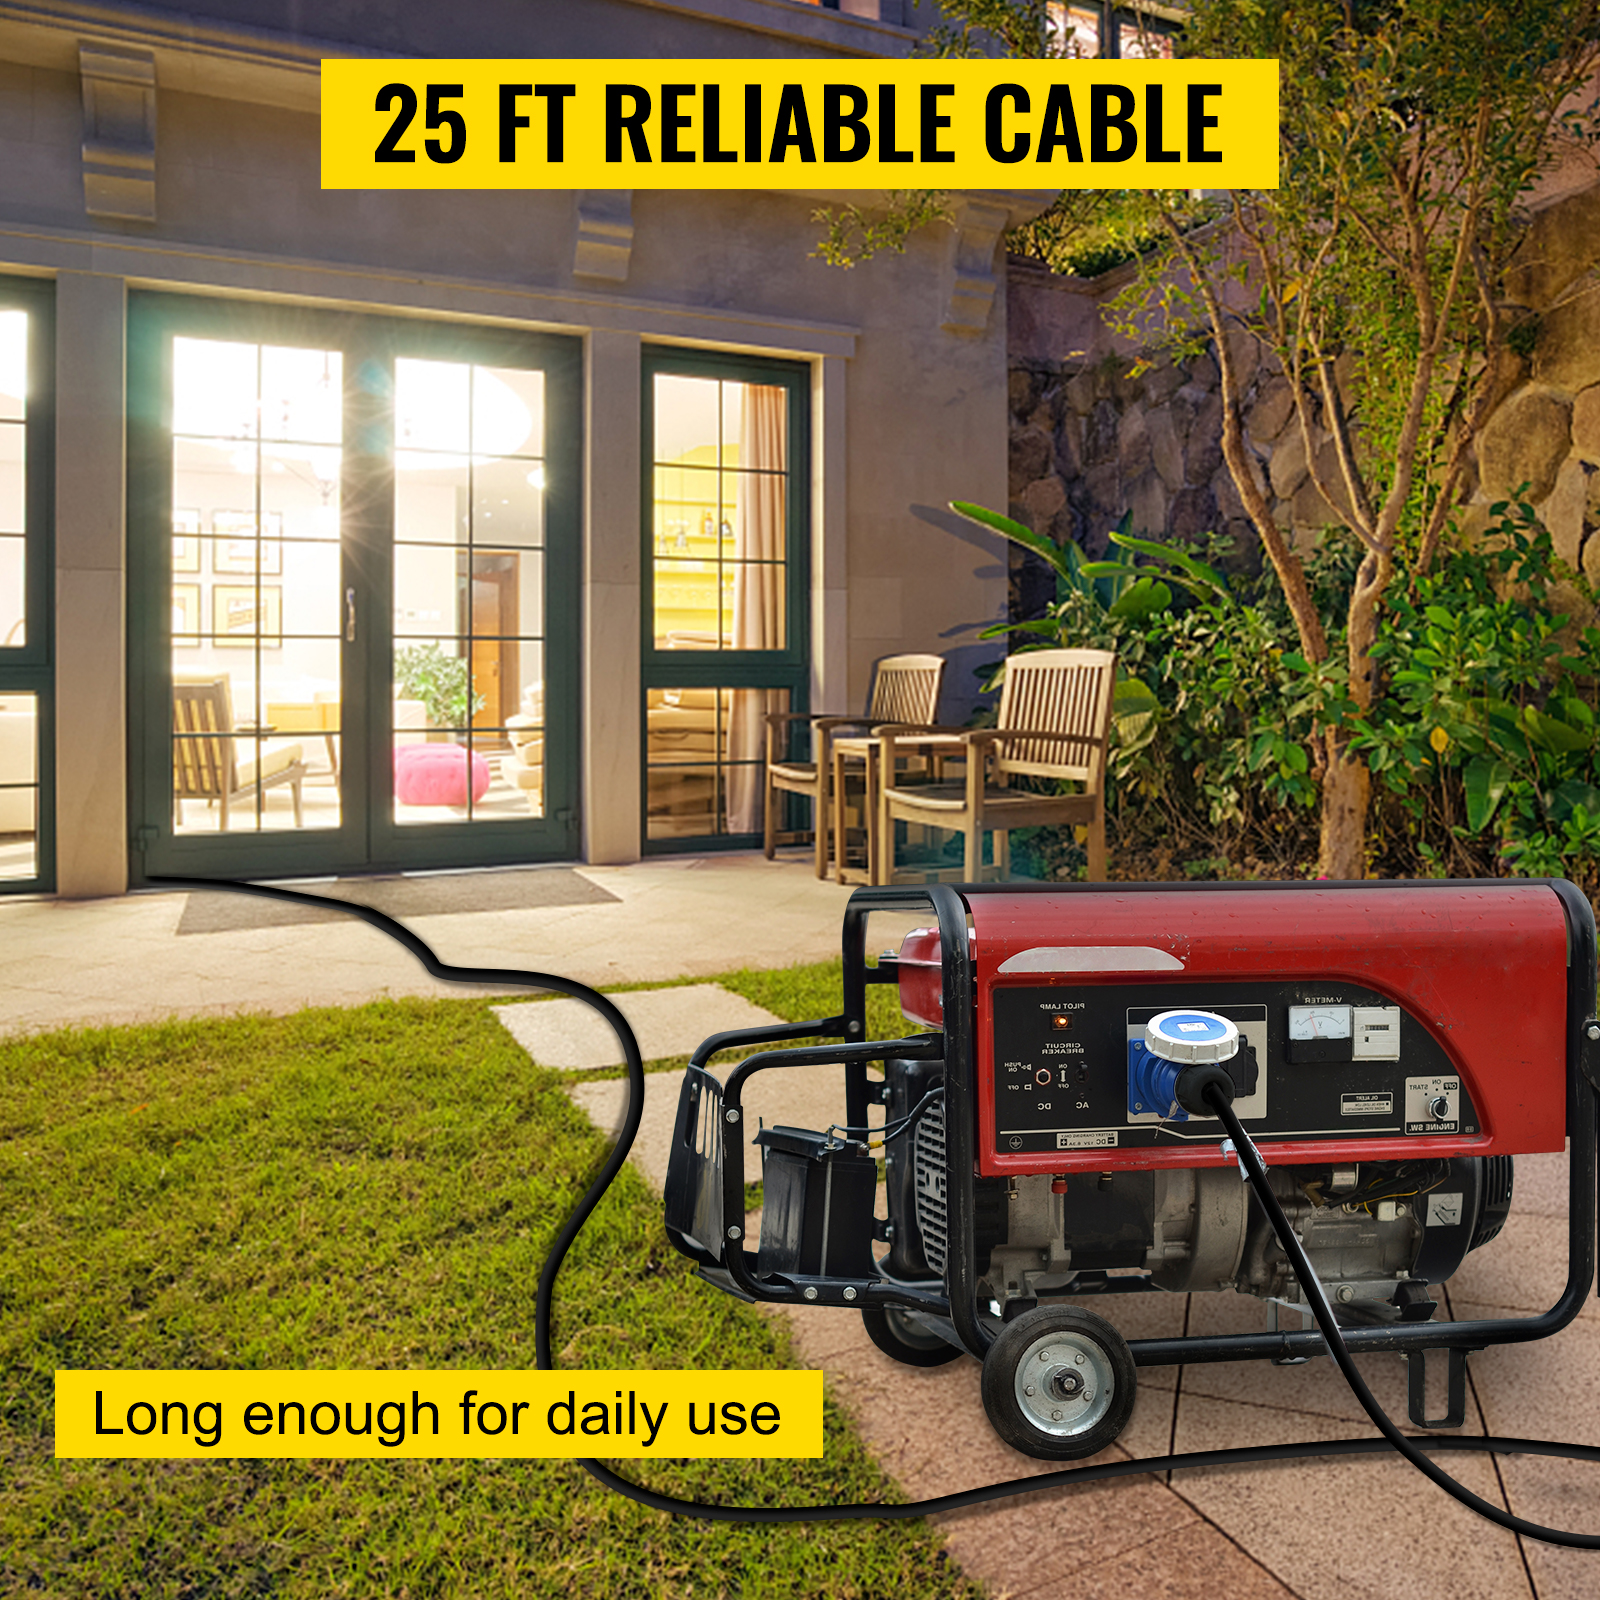 Generator Extension Cord 25 FT 4 Prong Power Cable 30 Amp L14-30p to 4*n5-20r for sale online 